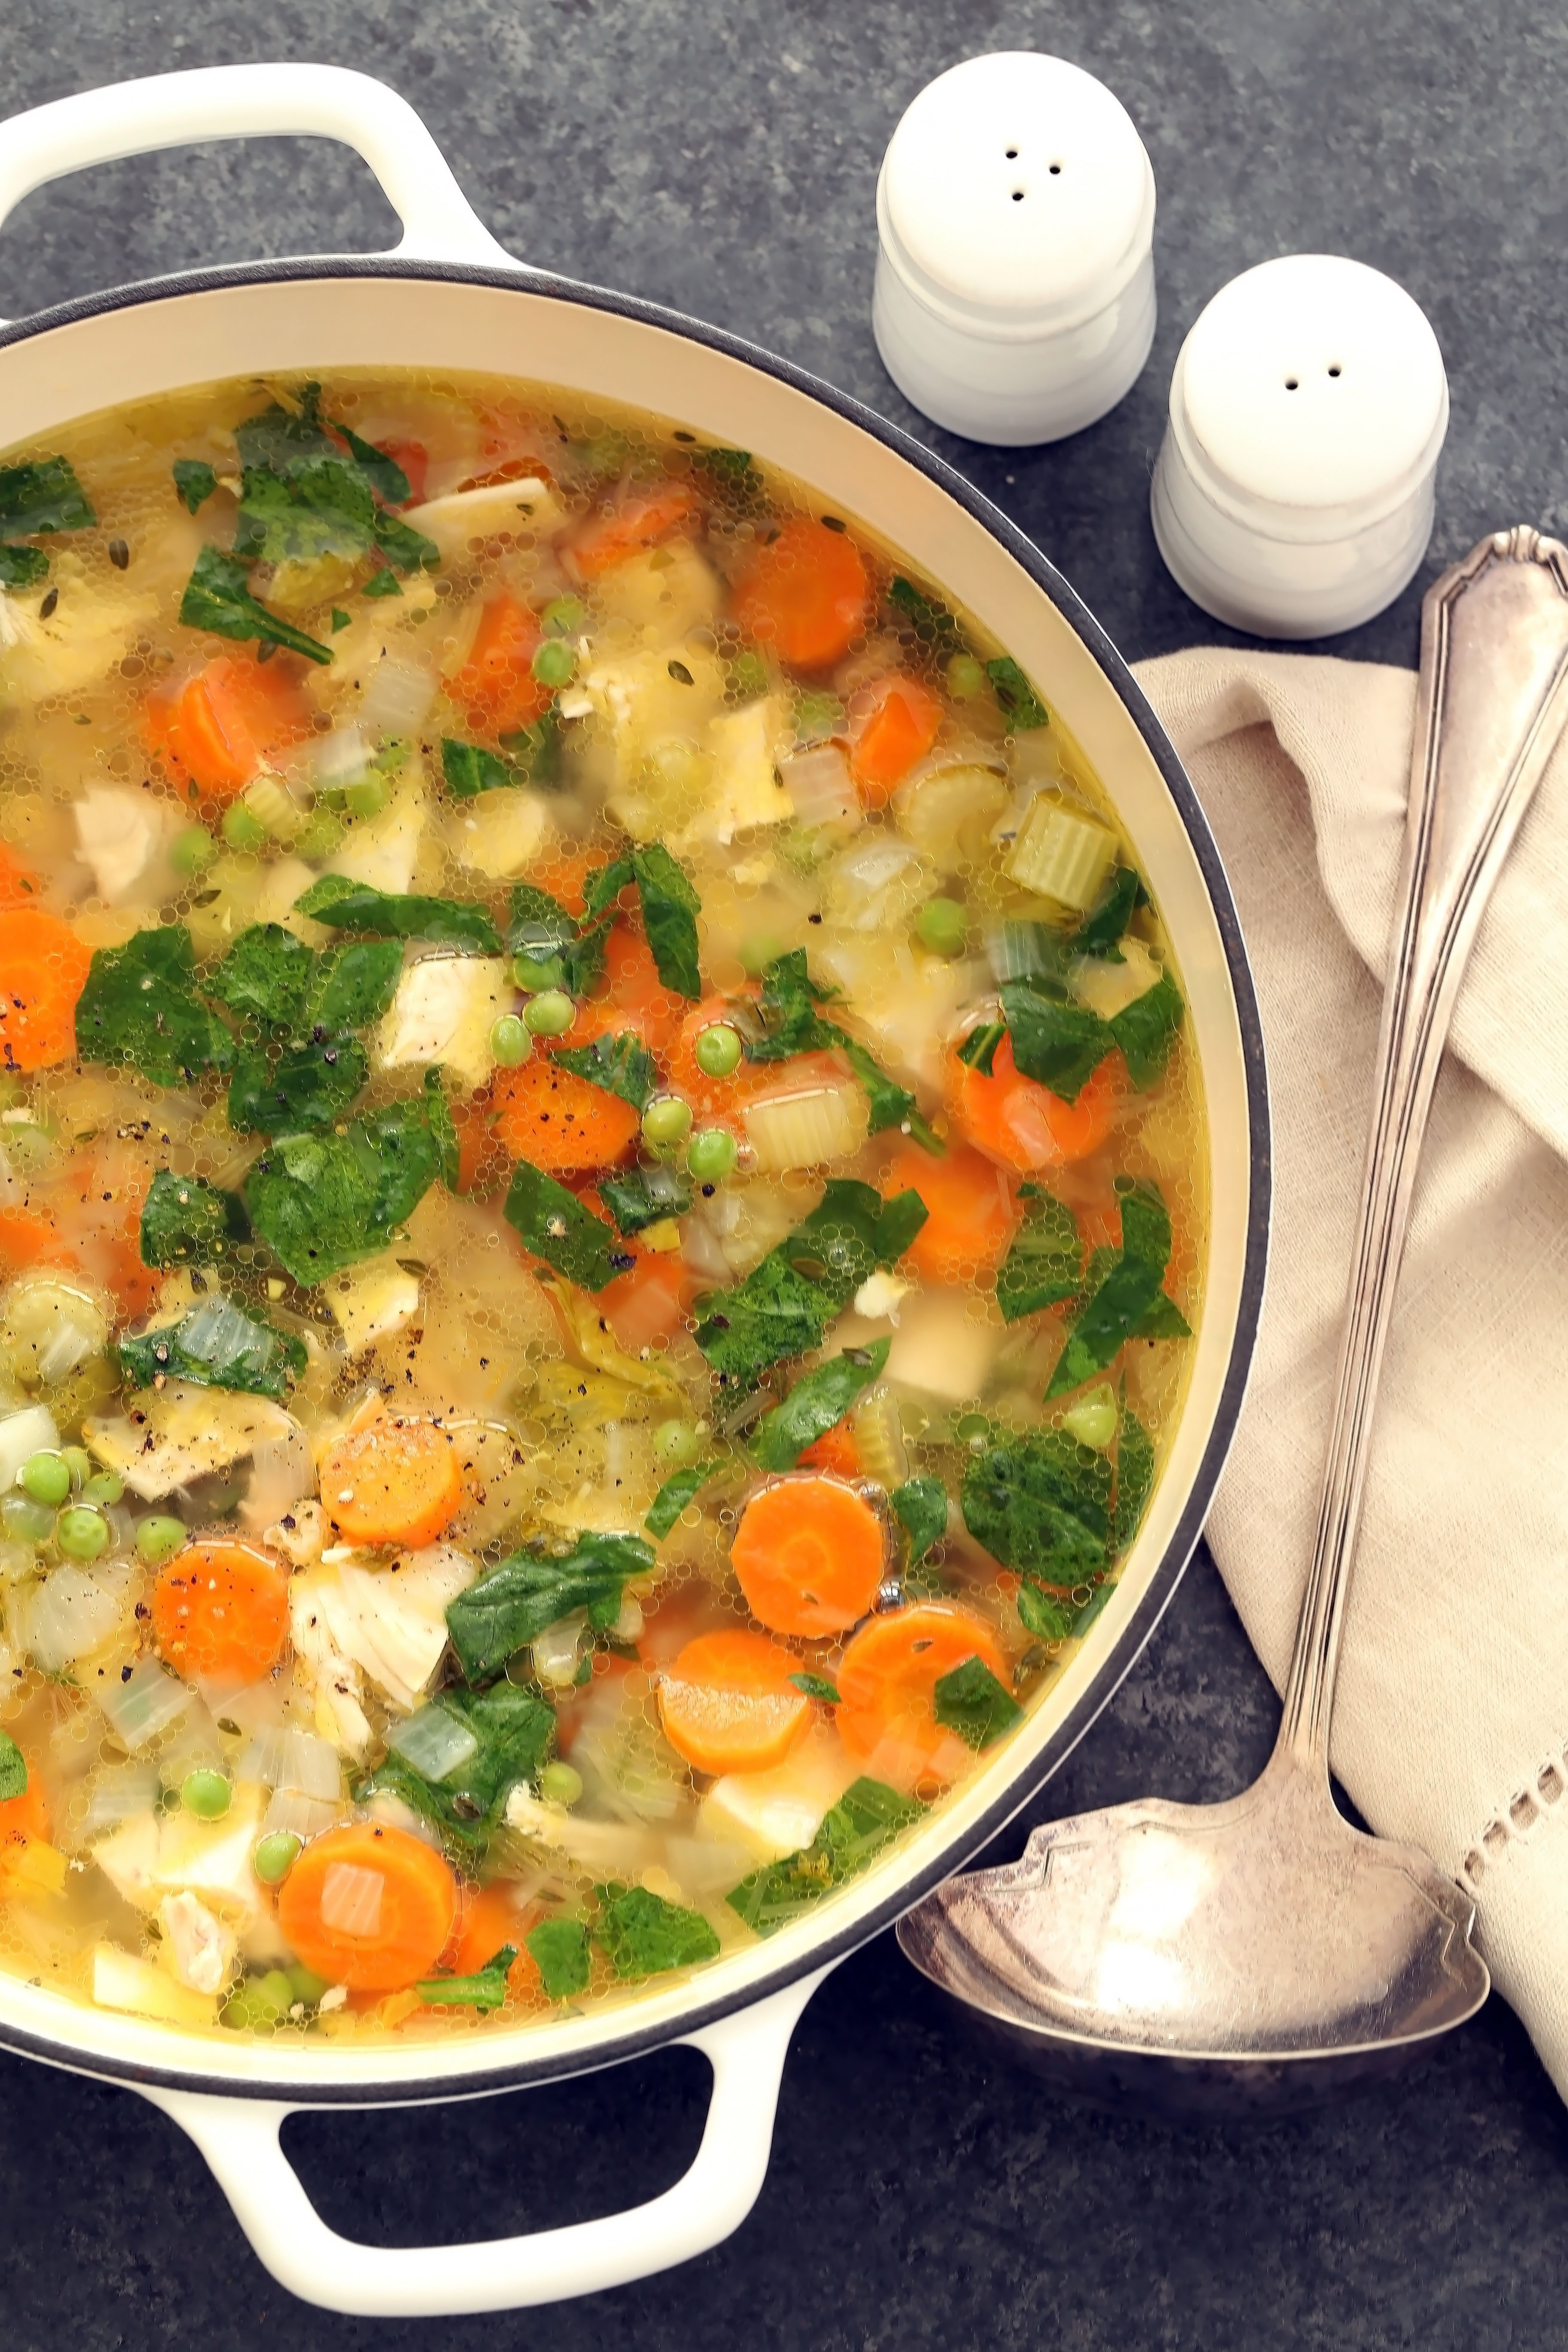 Chicken vegetable soup is a timeless classic that makes a perfect one-pot meal to make any night of the week